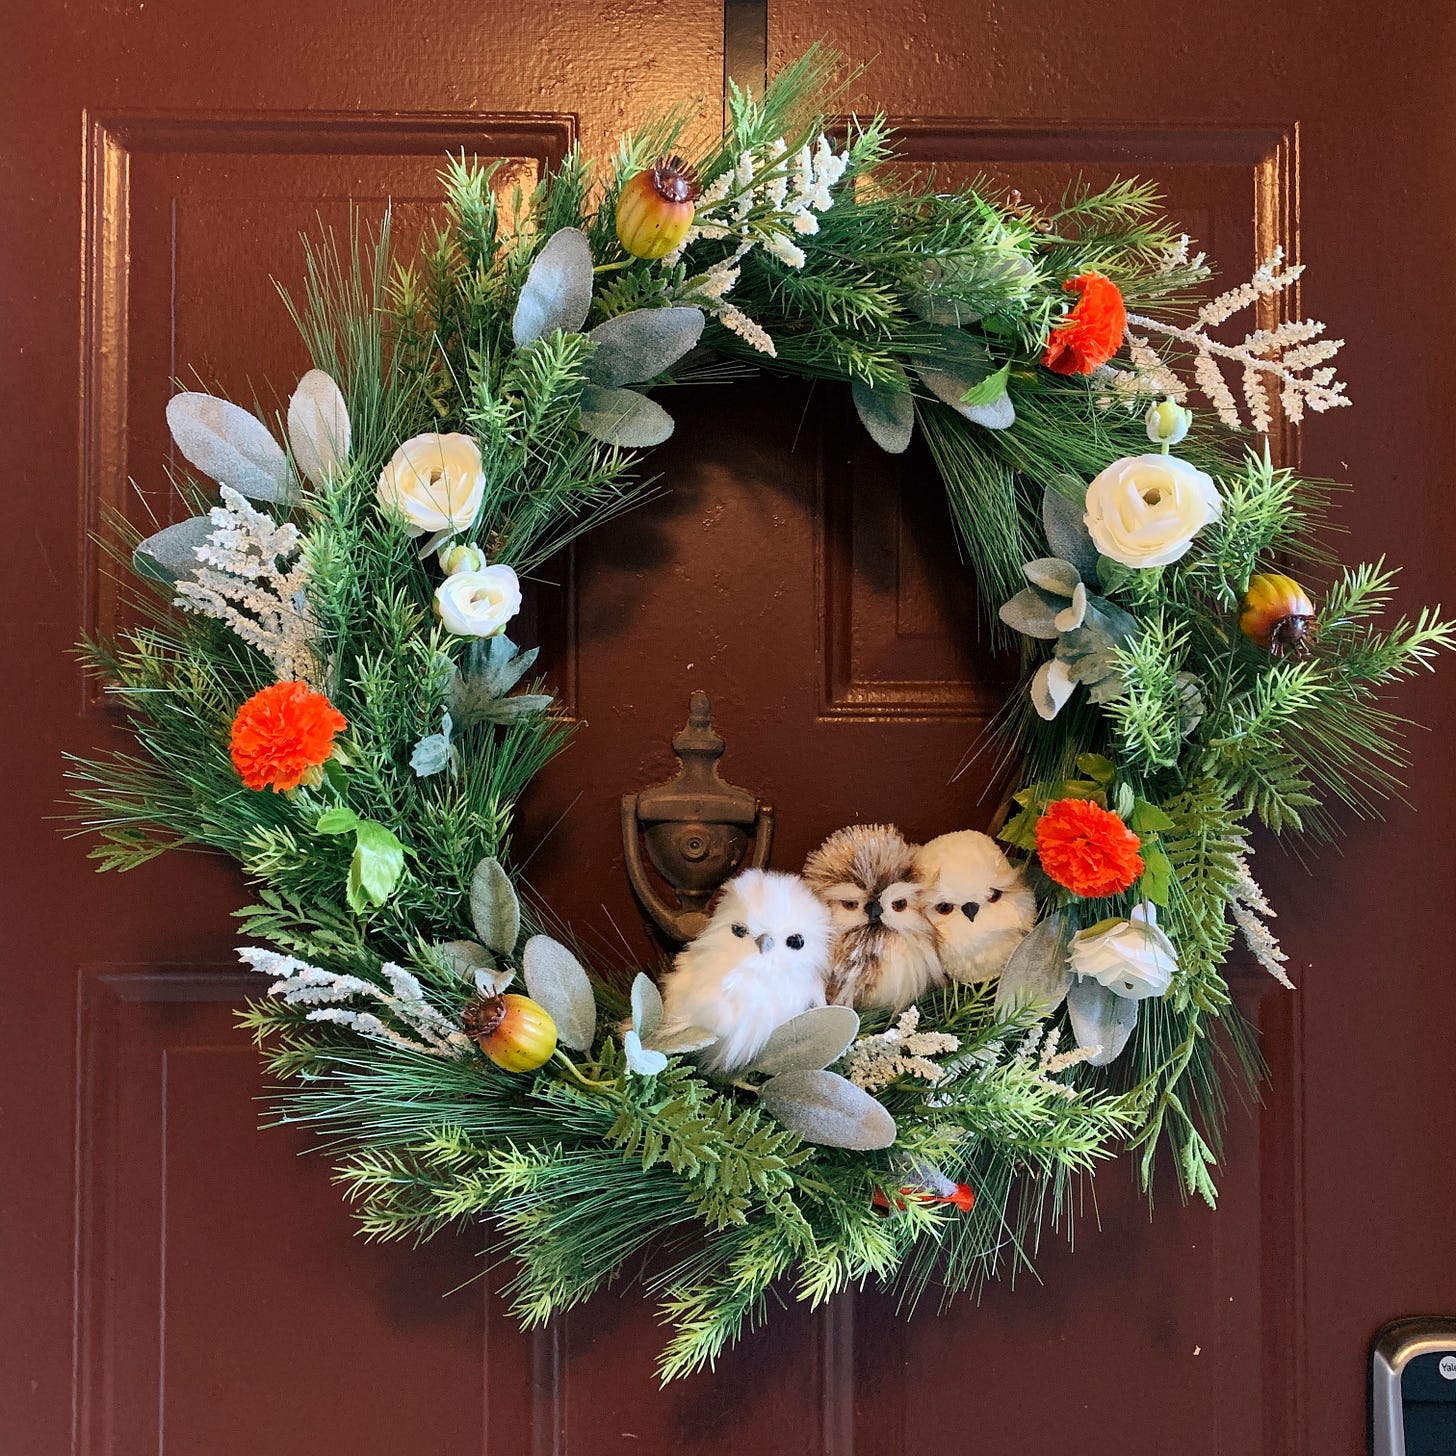 A winter wreath hanging from a burgundy front door. The wreath has three little owls, bright red flowers, white peonies, lamb's ear, and other greenery arranged together.